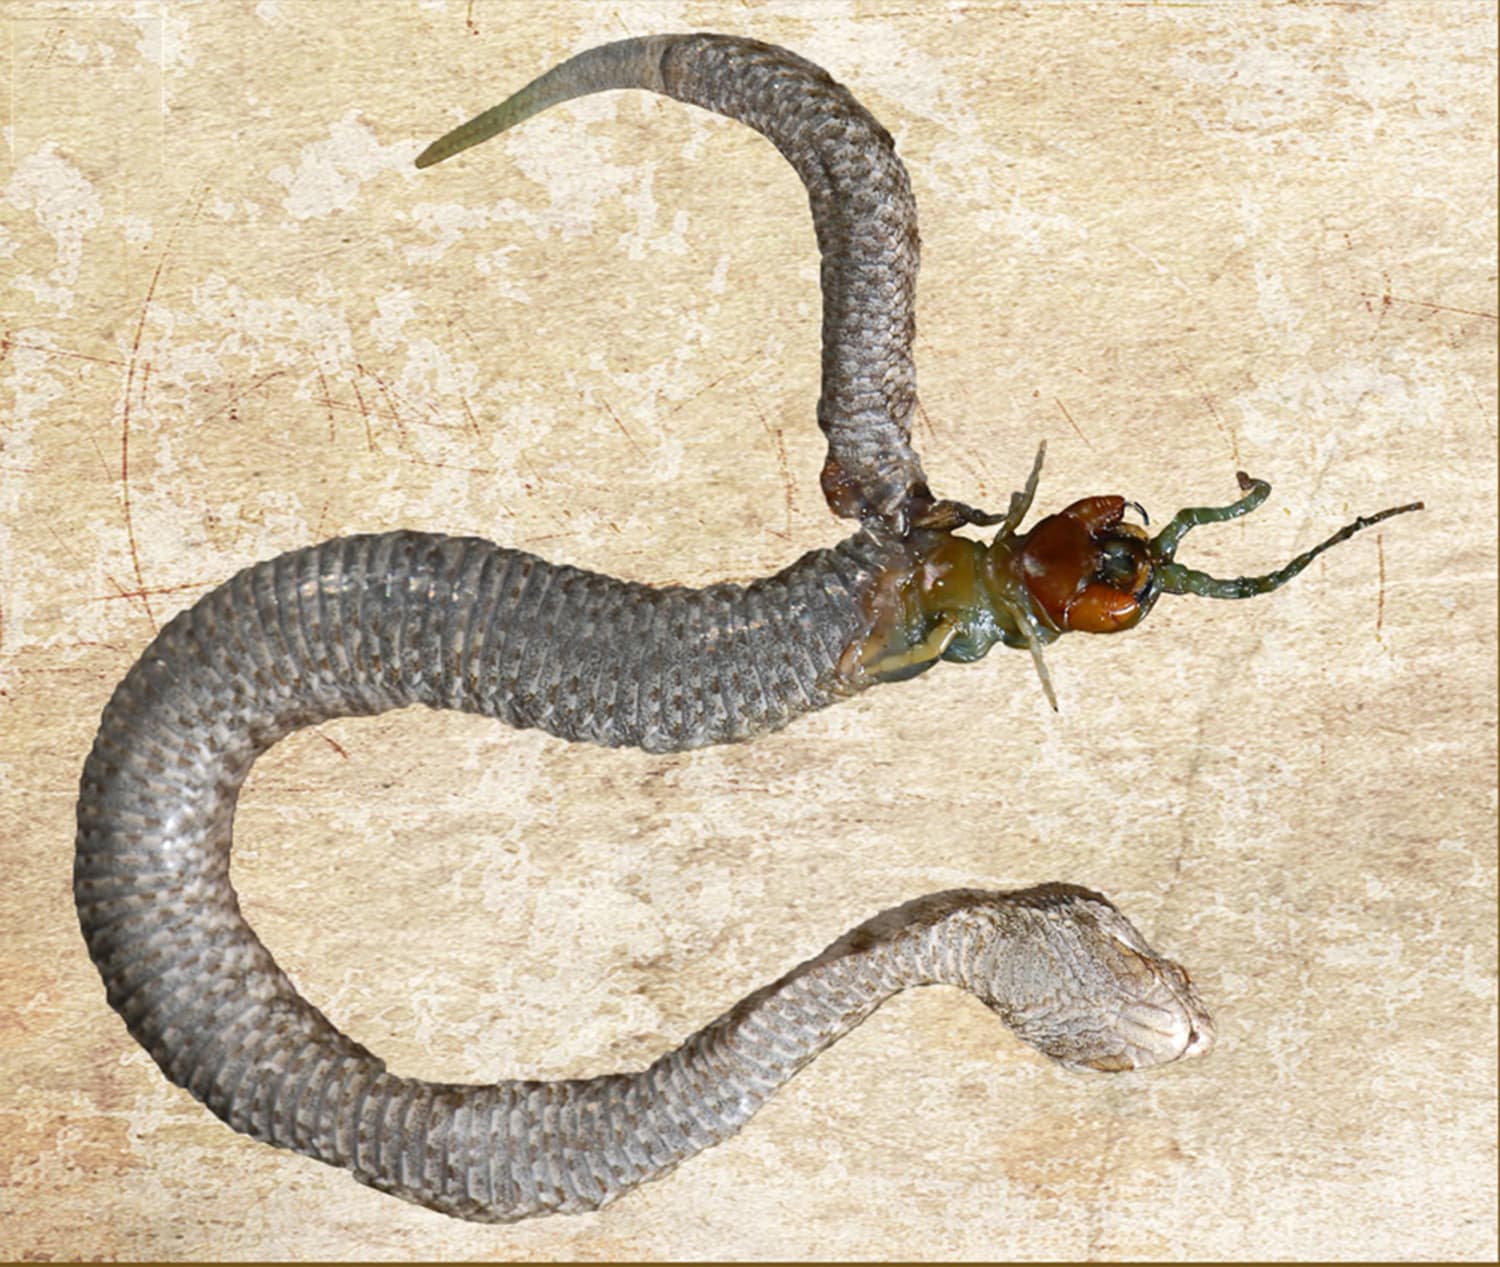 Last Supper: Centipede Dies Eating Way Out of Snake Belly